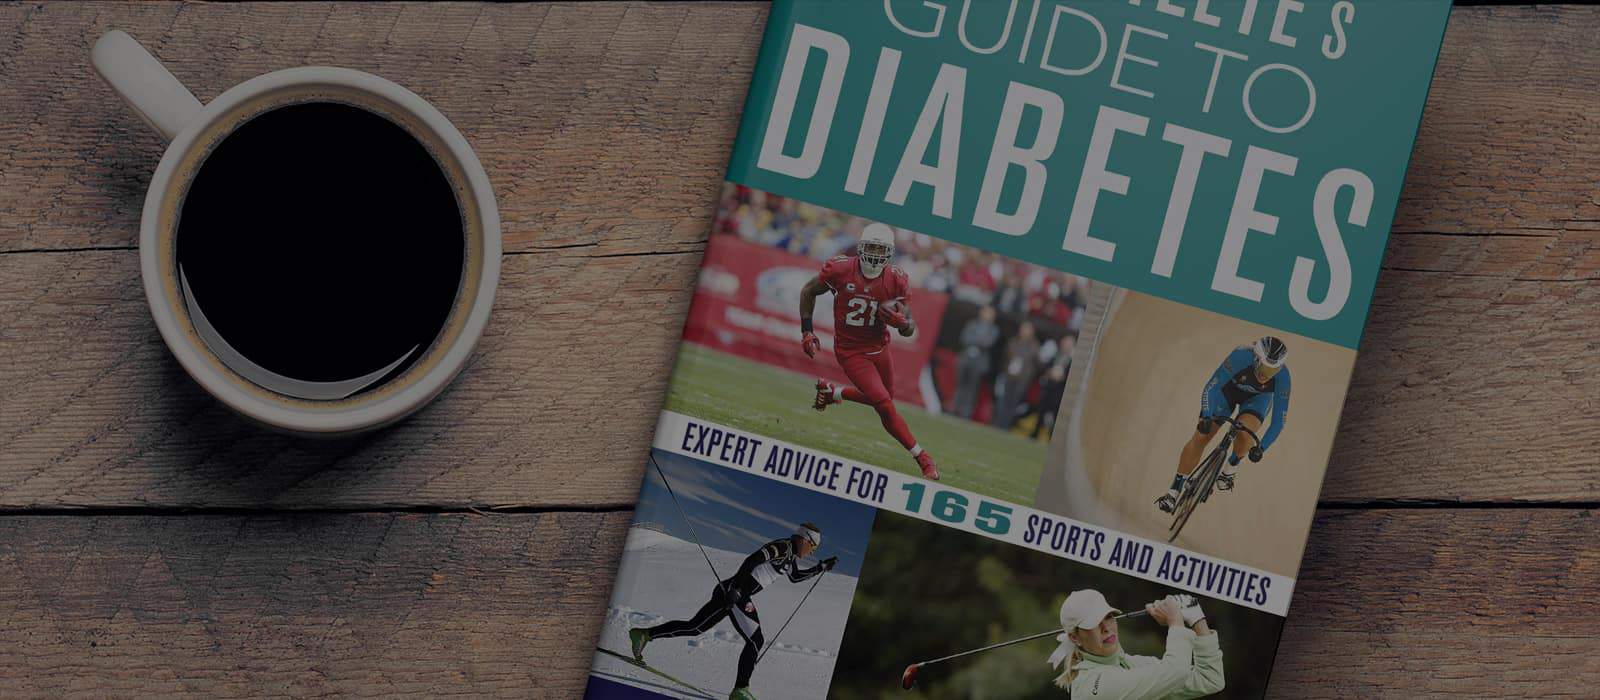 Review: The Athlete’s Guide to Diabetes by Dr. Sheri Colberg